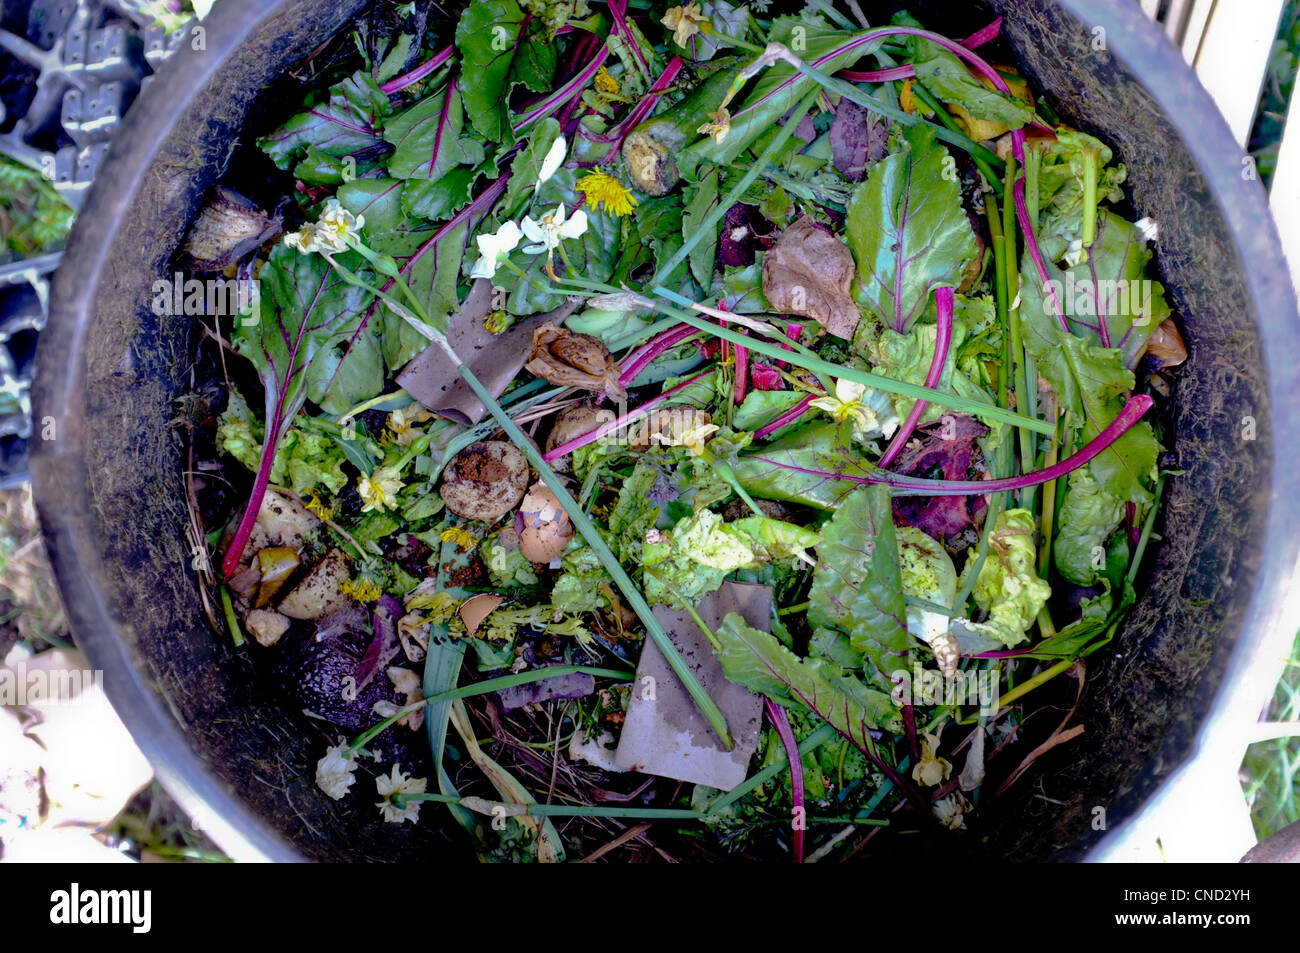 An overhead view of a compost bin showing vegetables and other kitchen waste Stock Photo